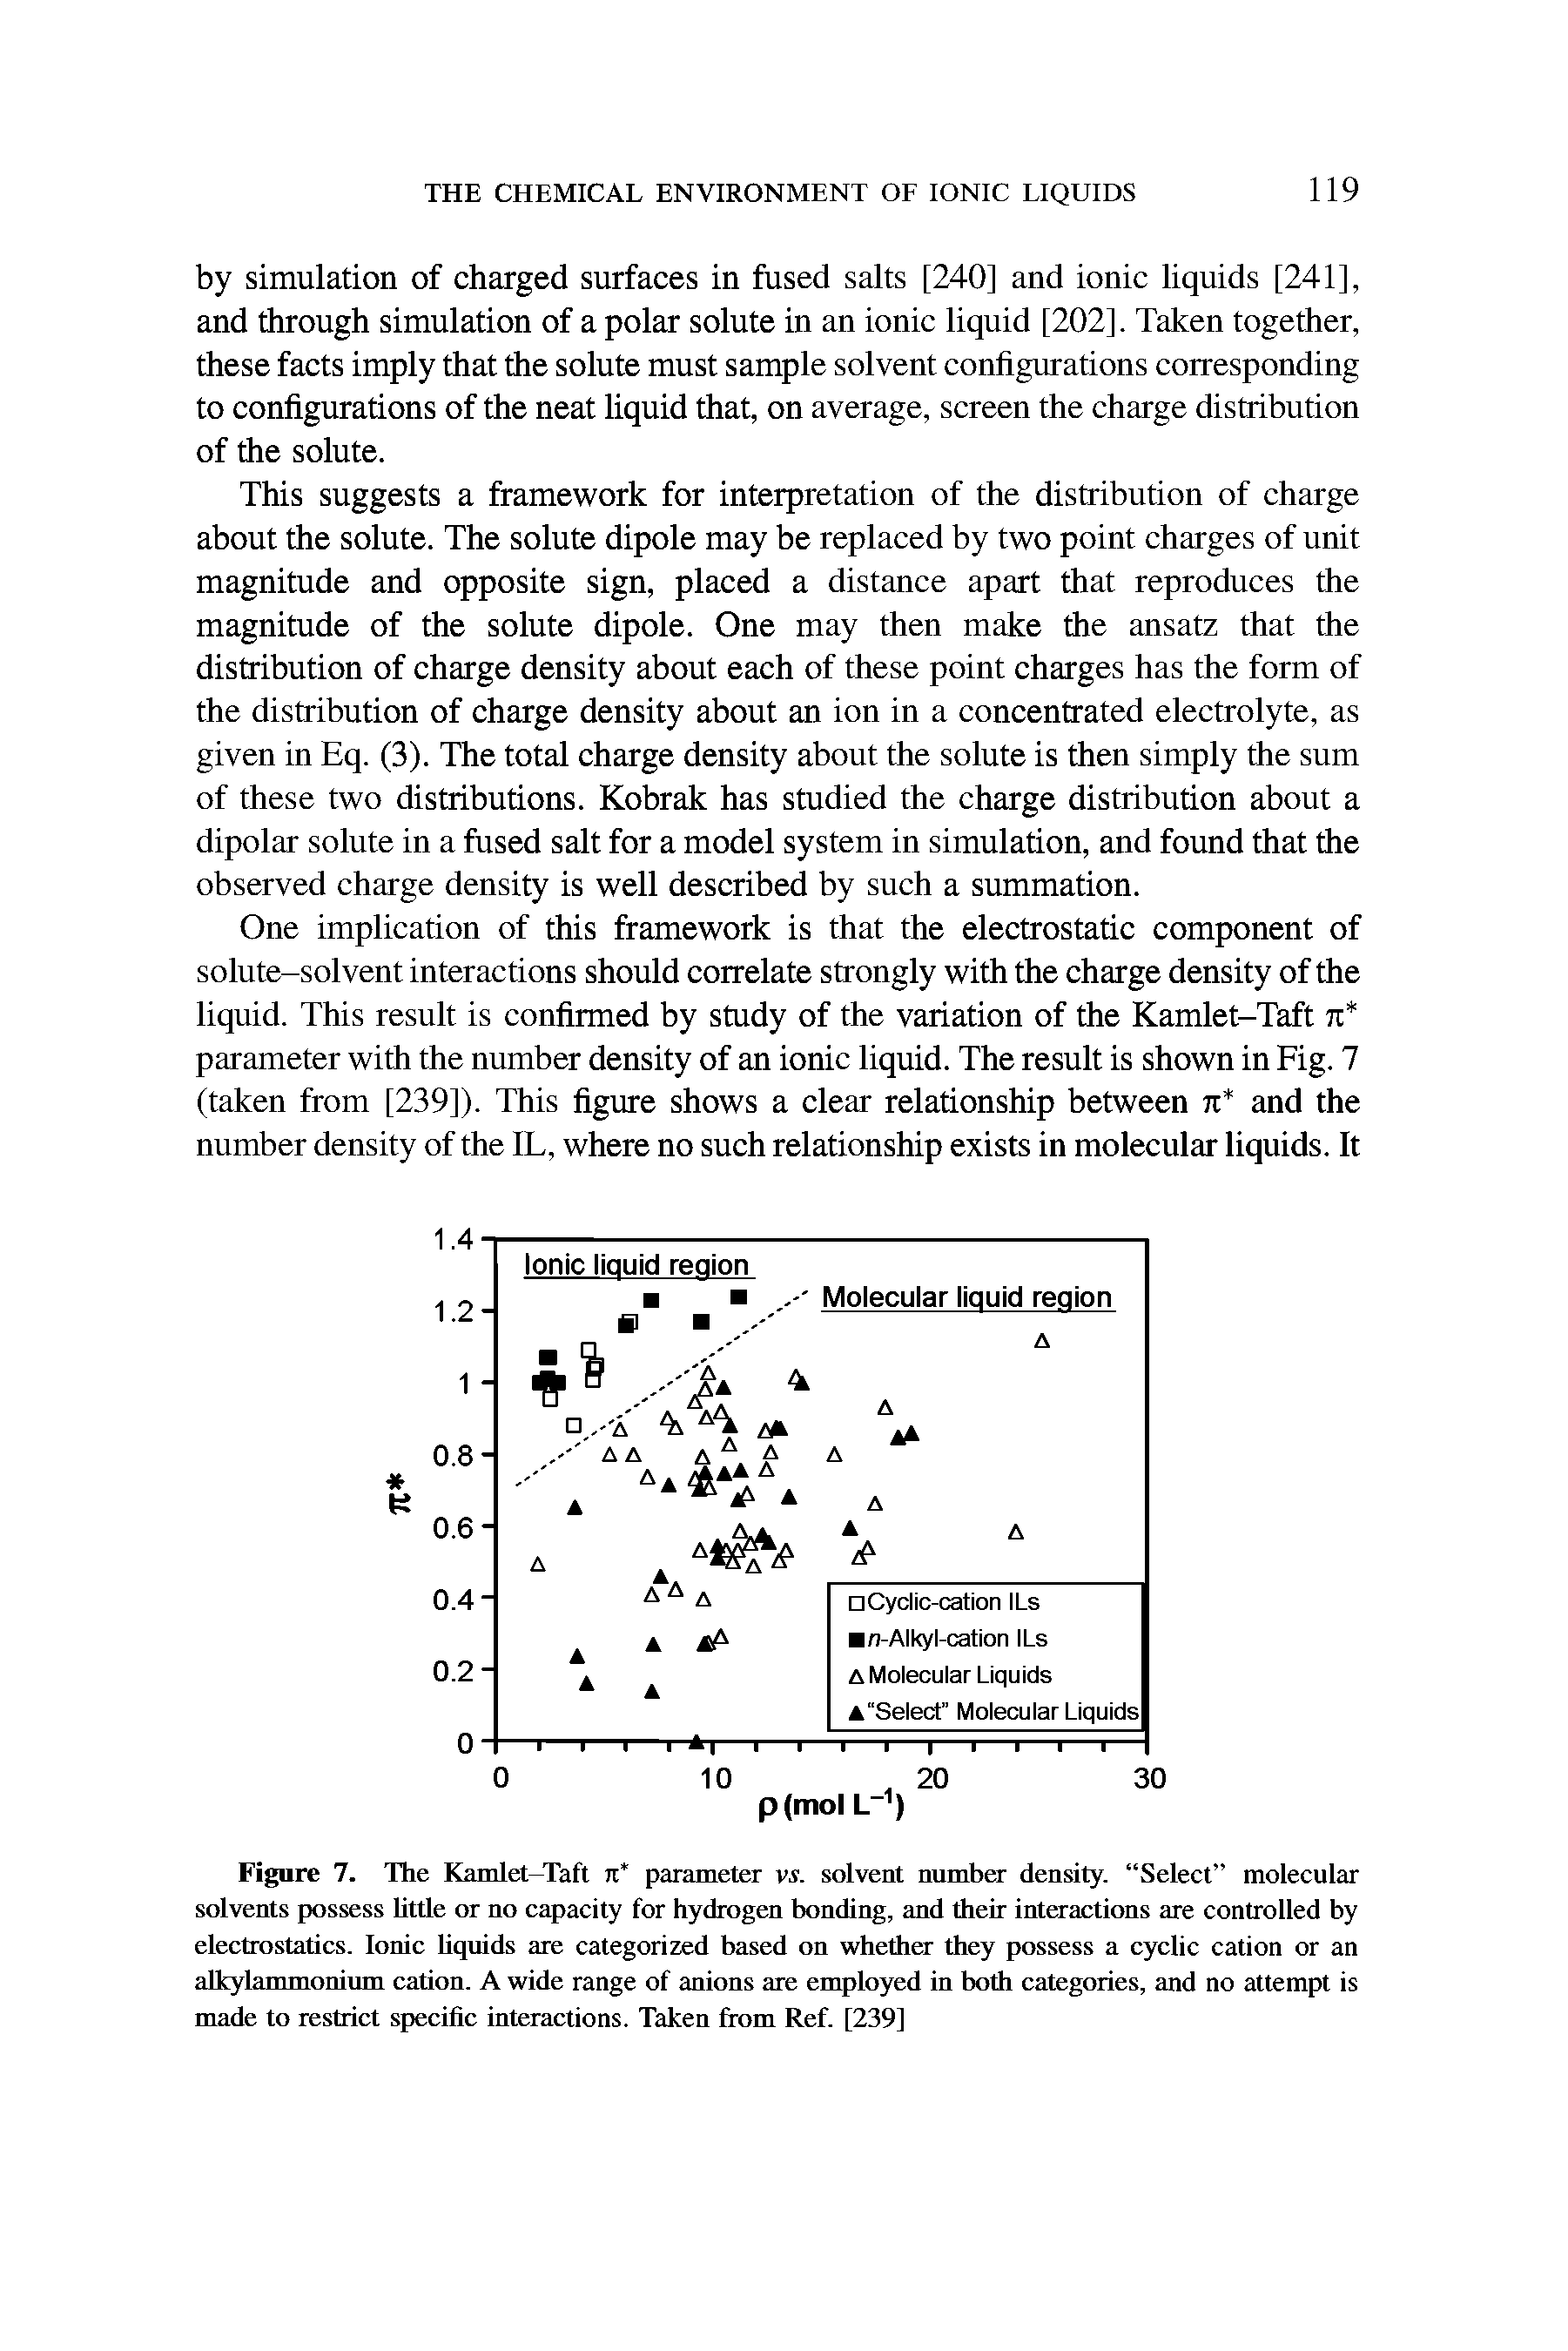 Figure 7. The Kamlet—Taft n parameter vs. solvent number density. Select molecular solvents possess little or no capacity for hydrogen bonding, and their interactions are controlled by electrostatics. Ionic liquids are categorized based on whether they possess a cyclic cation or an alkylammonium cation. A wide range of anions are employed in both categories, and no attempt is made to restrict specific interactions. Taken from Ref. [239]...